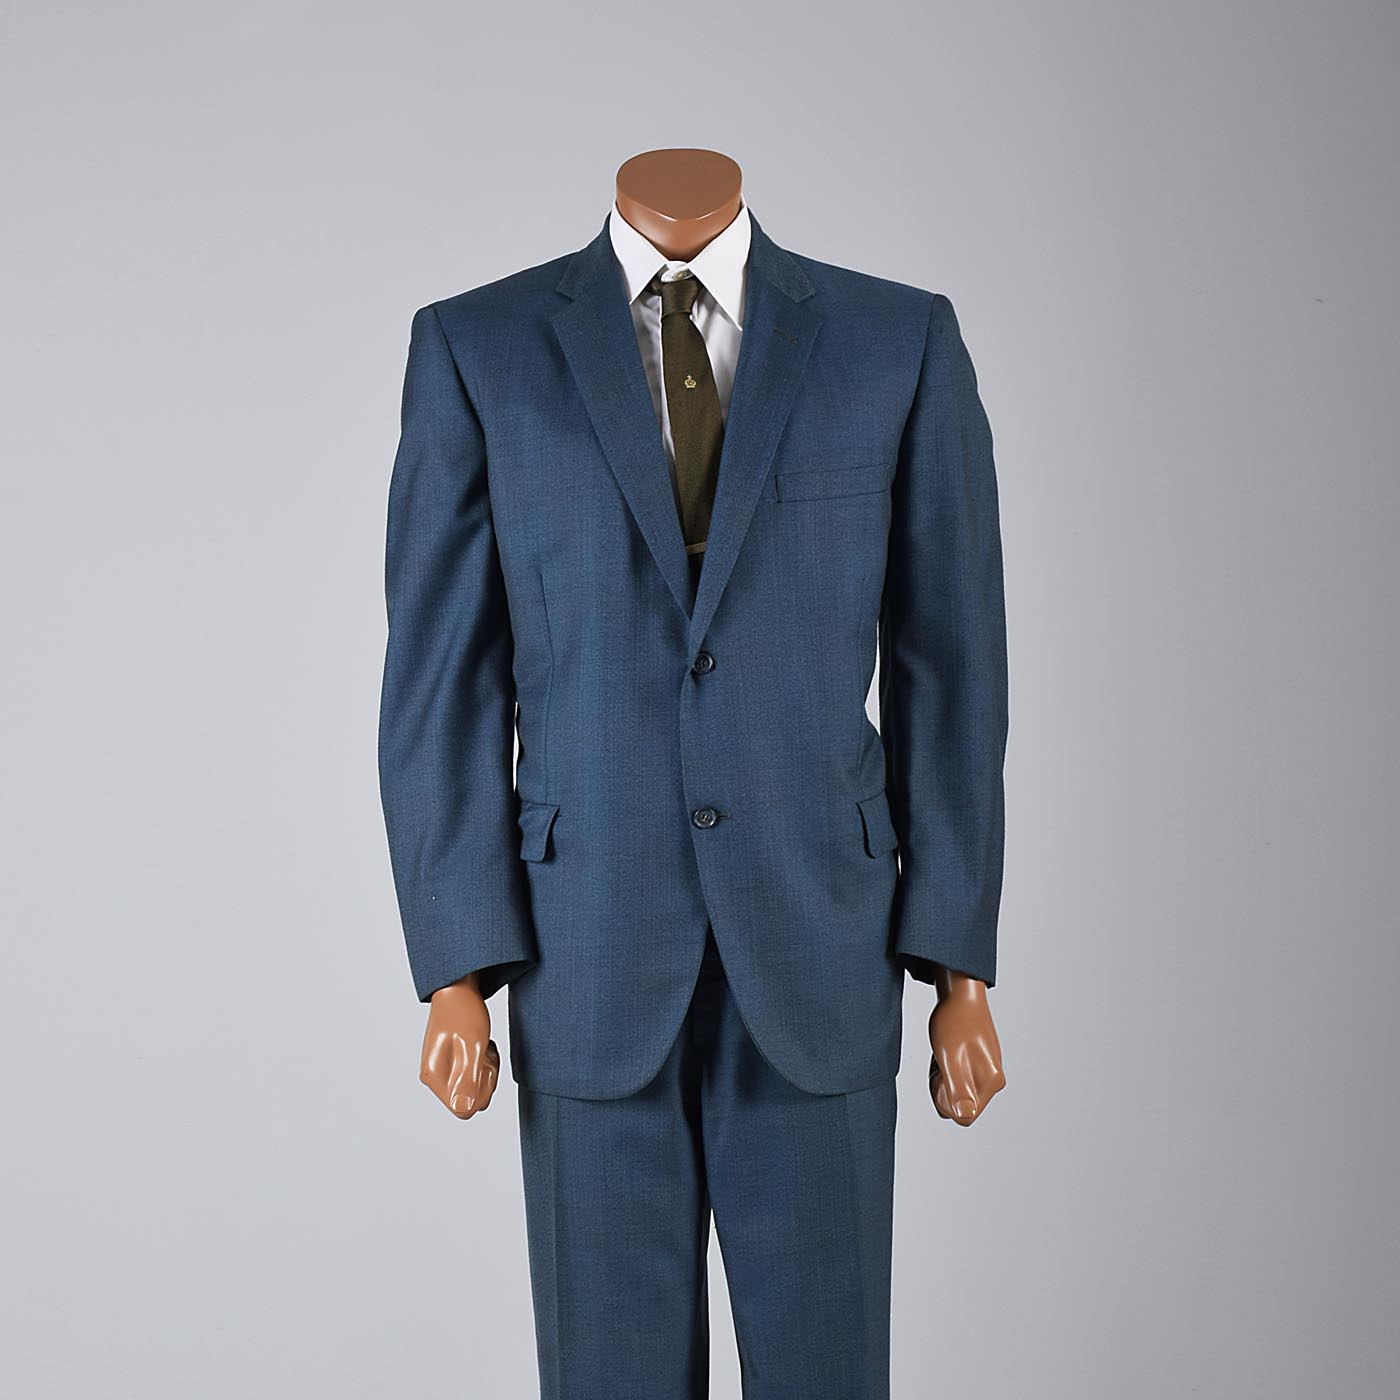 1960s Men's Three Piece Suit Teal Blue Sharkskin with Red Windowpane